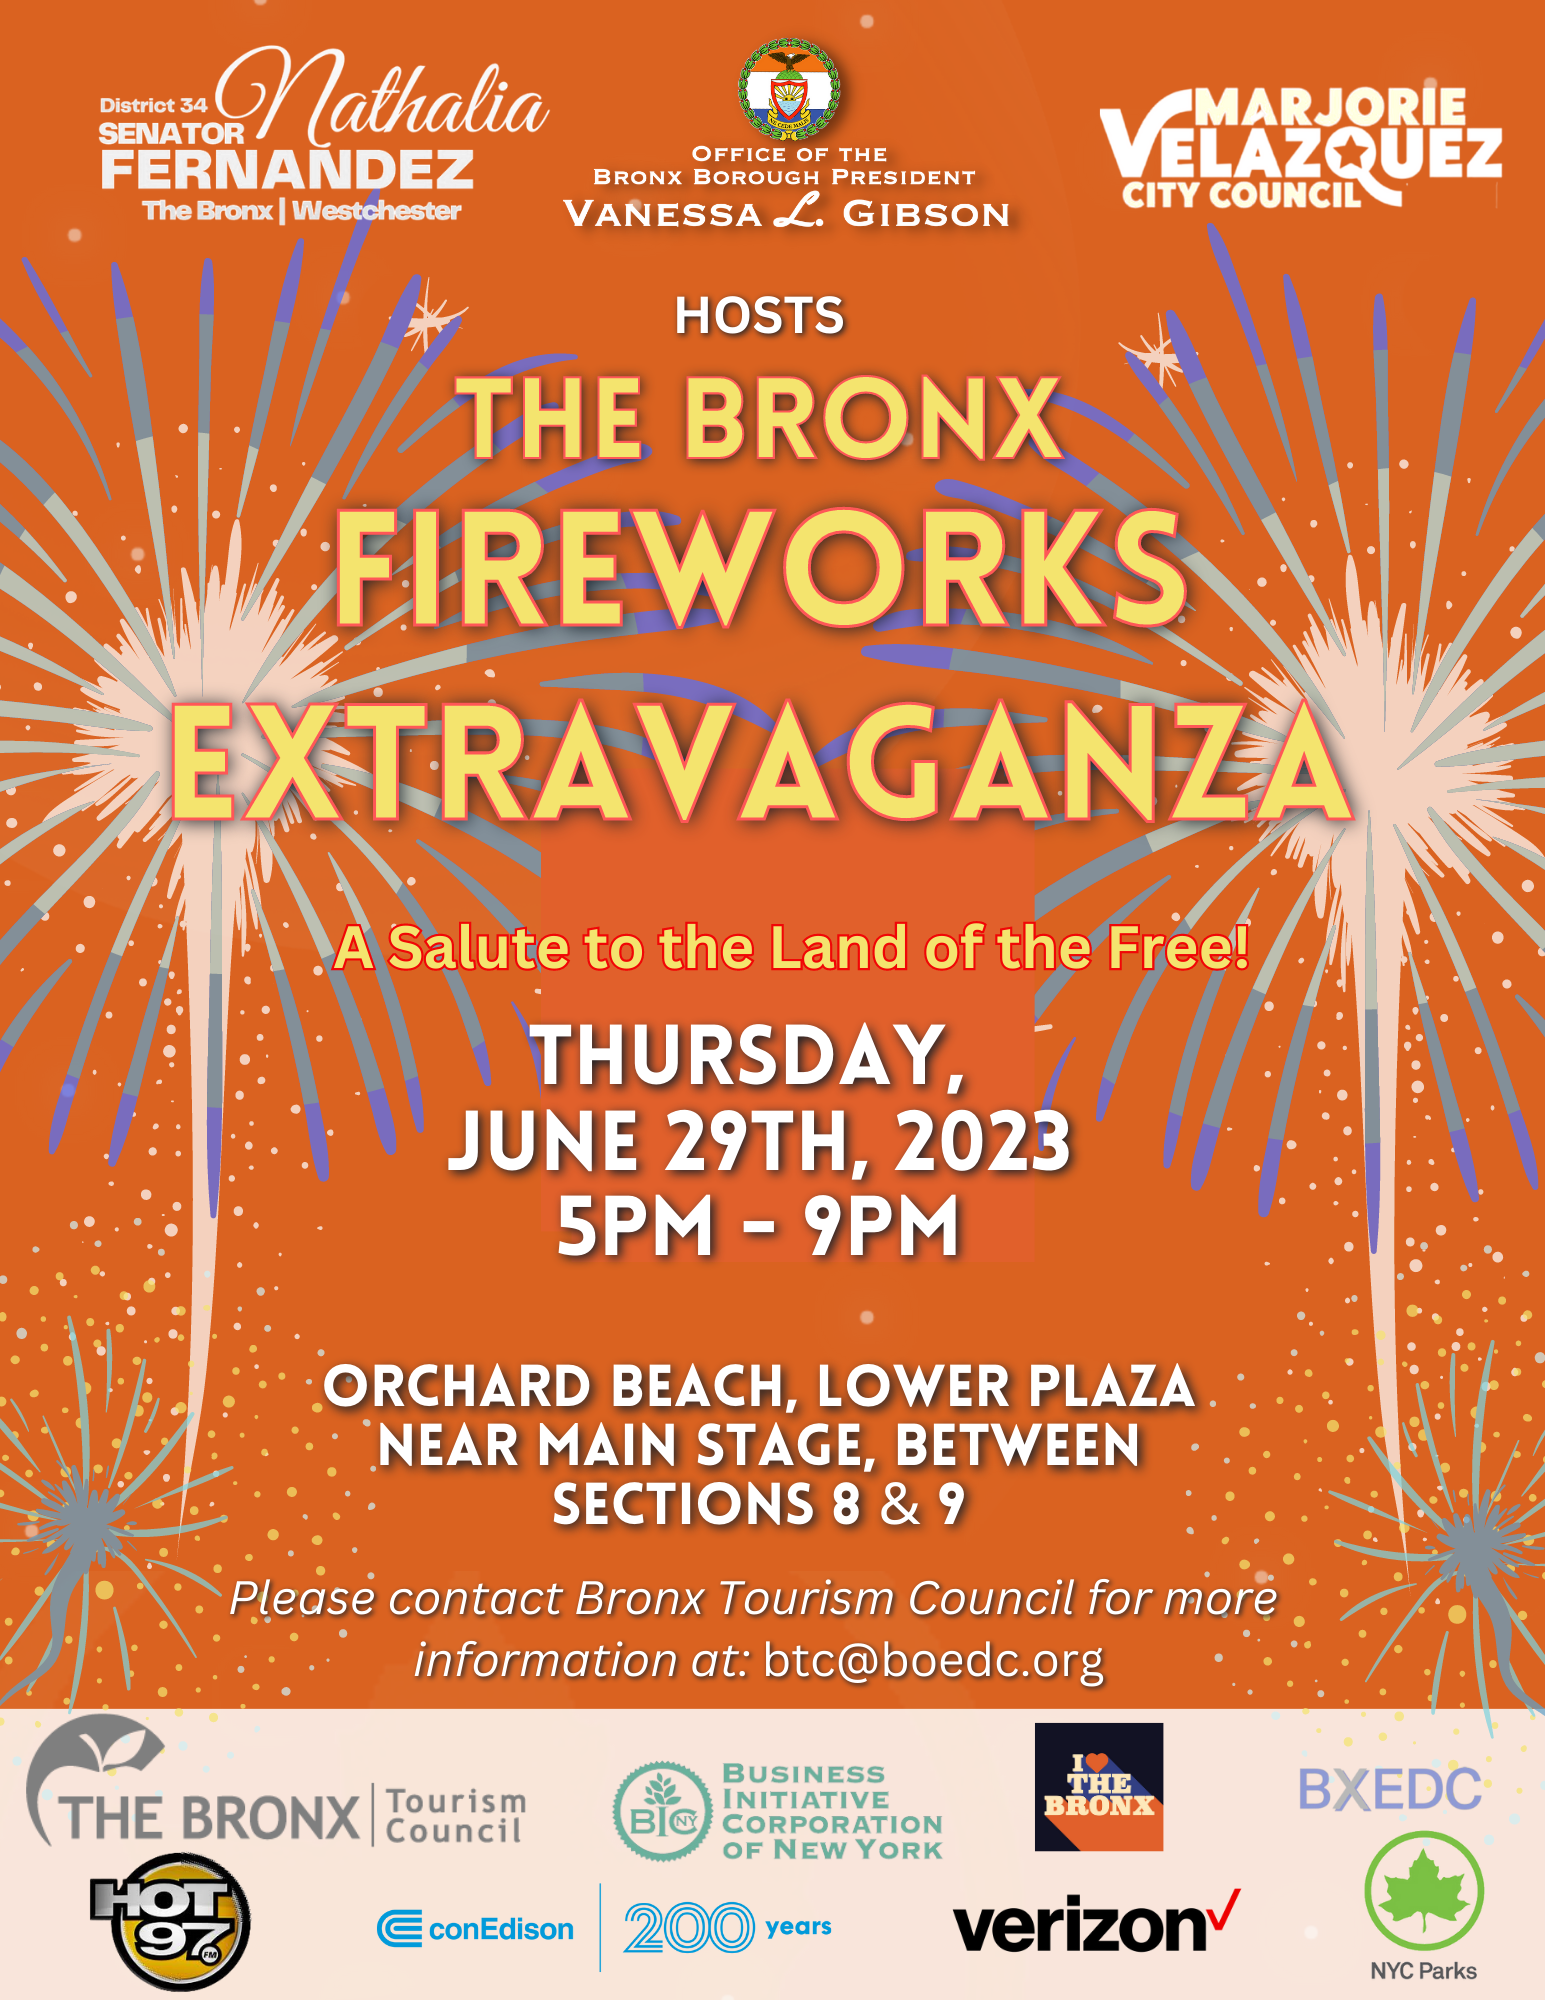 A flyer for The Bronx Fireworks Extravaganza on June 29, 2023